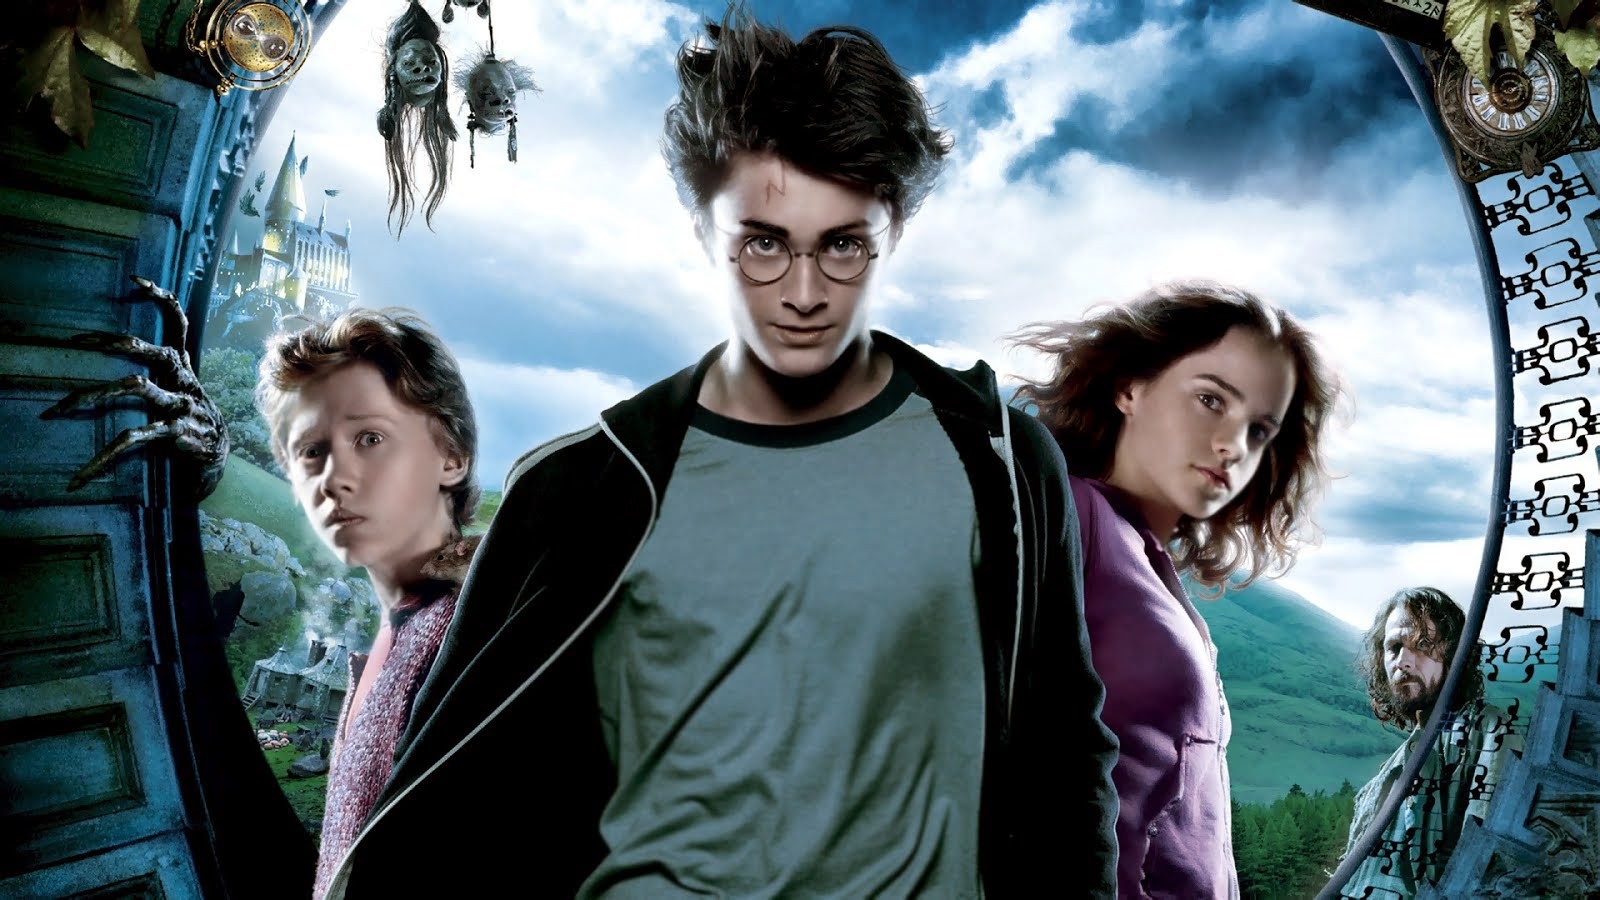 Test your Harry Potter knowledge with this Prisoner of Azkaban Trivia Quiz